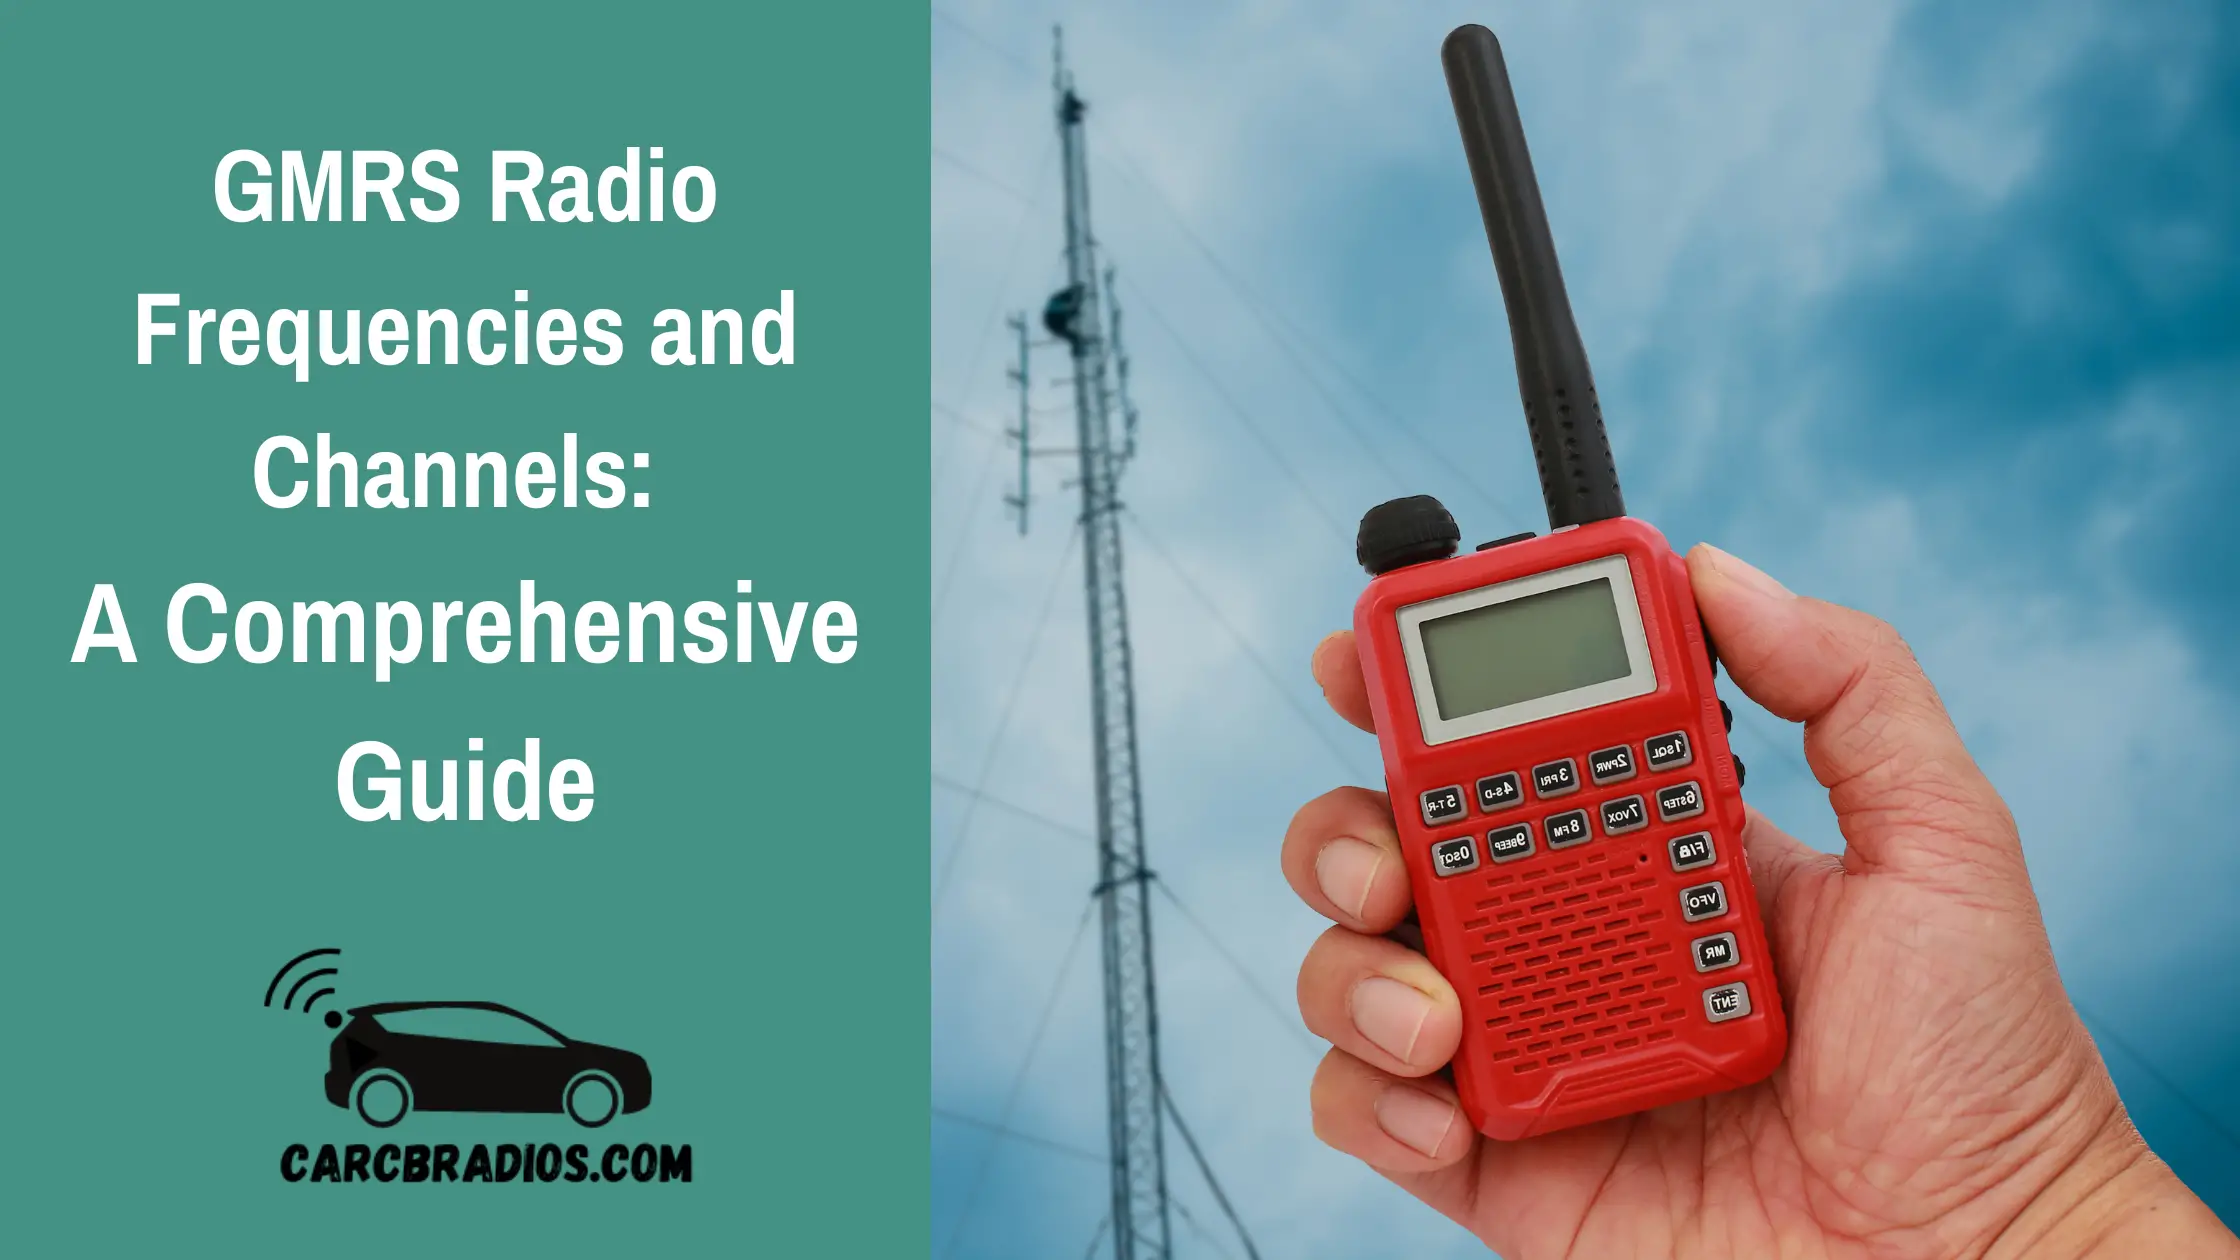 GMRS and FRS use the same frequencies and can communicate with each other. The GMRS & FRS channels and frequencies are listed in the table below, along with the maximum permitted power for each service.